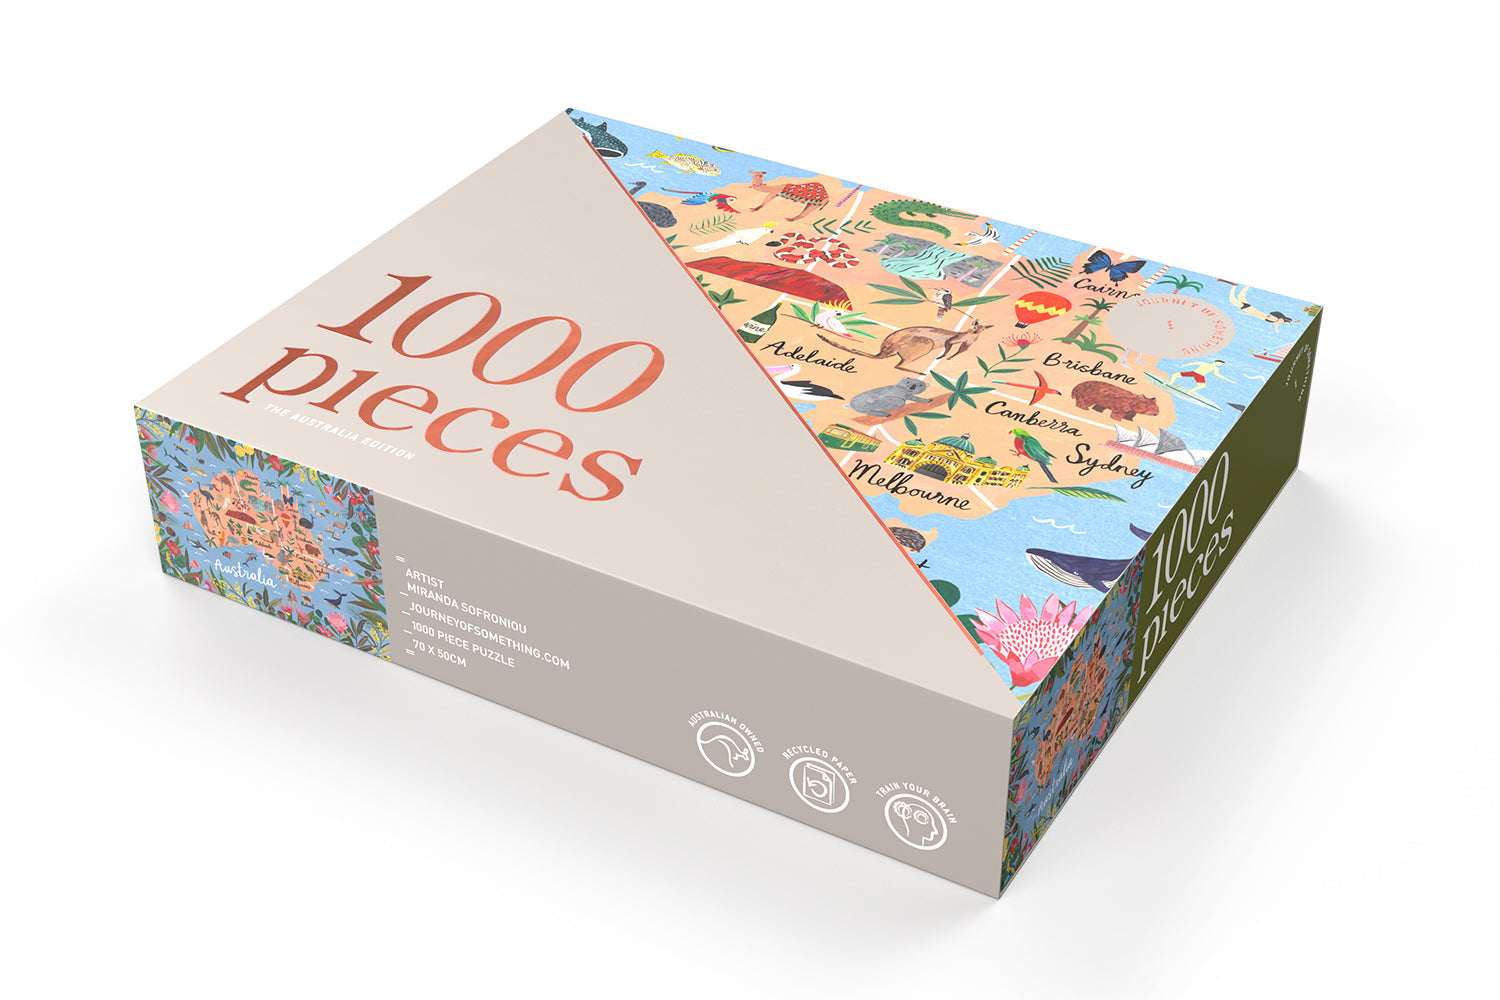 A captivating 1000-piece puzzle featuring iconic elements of Australia's landscape and culture.